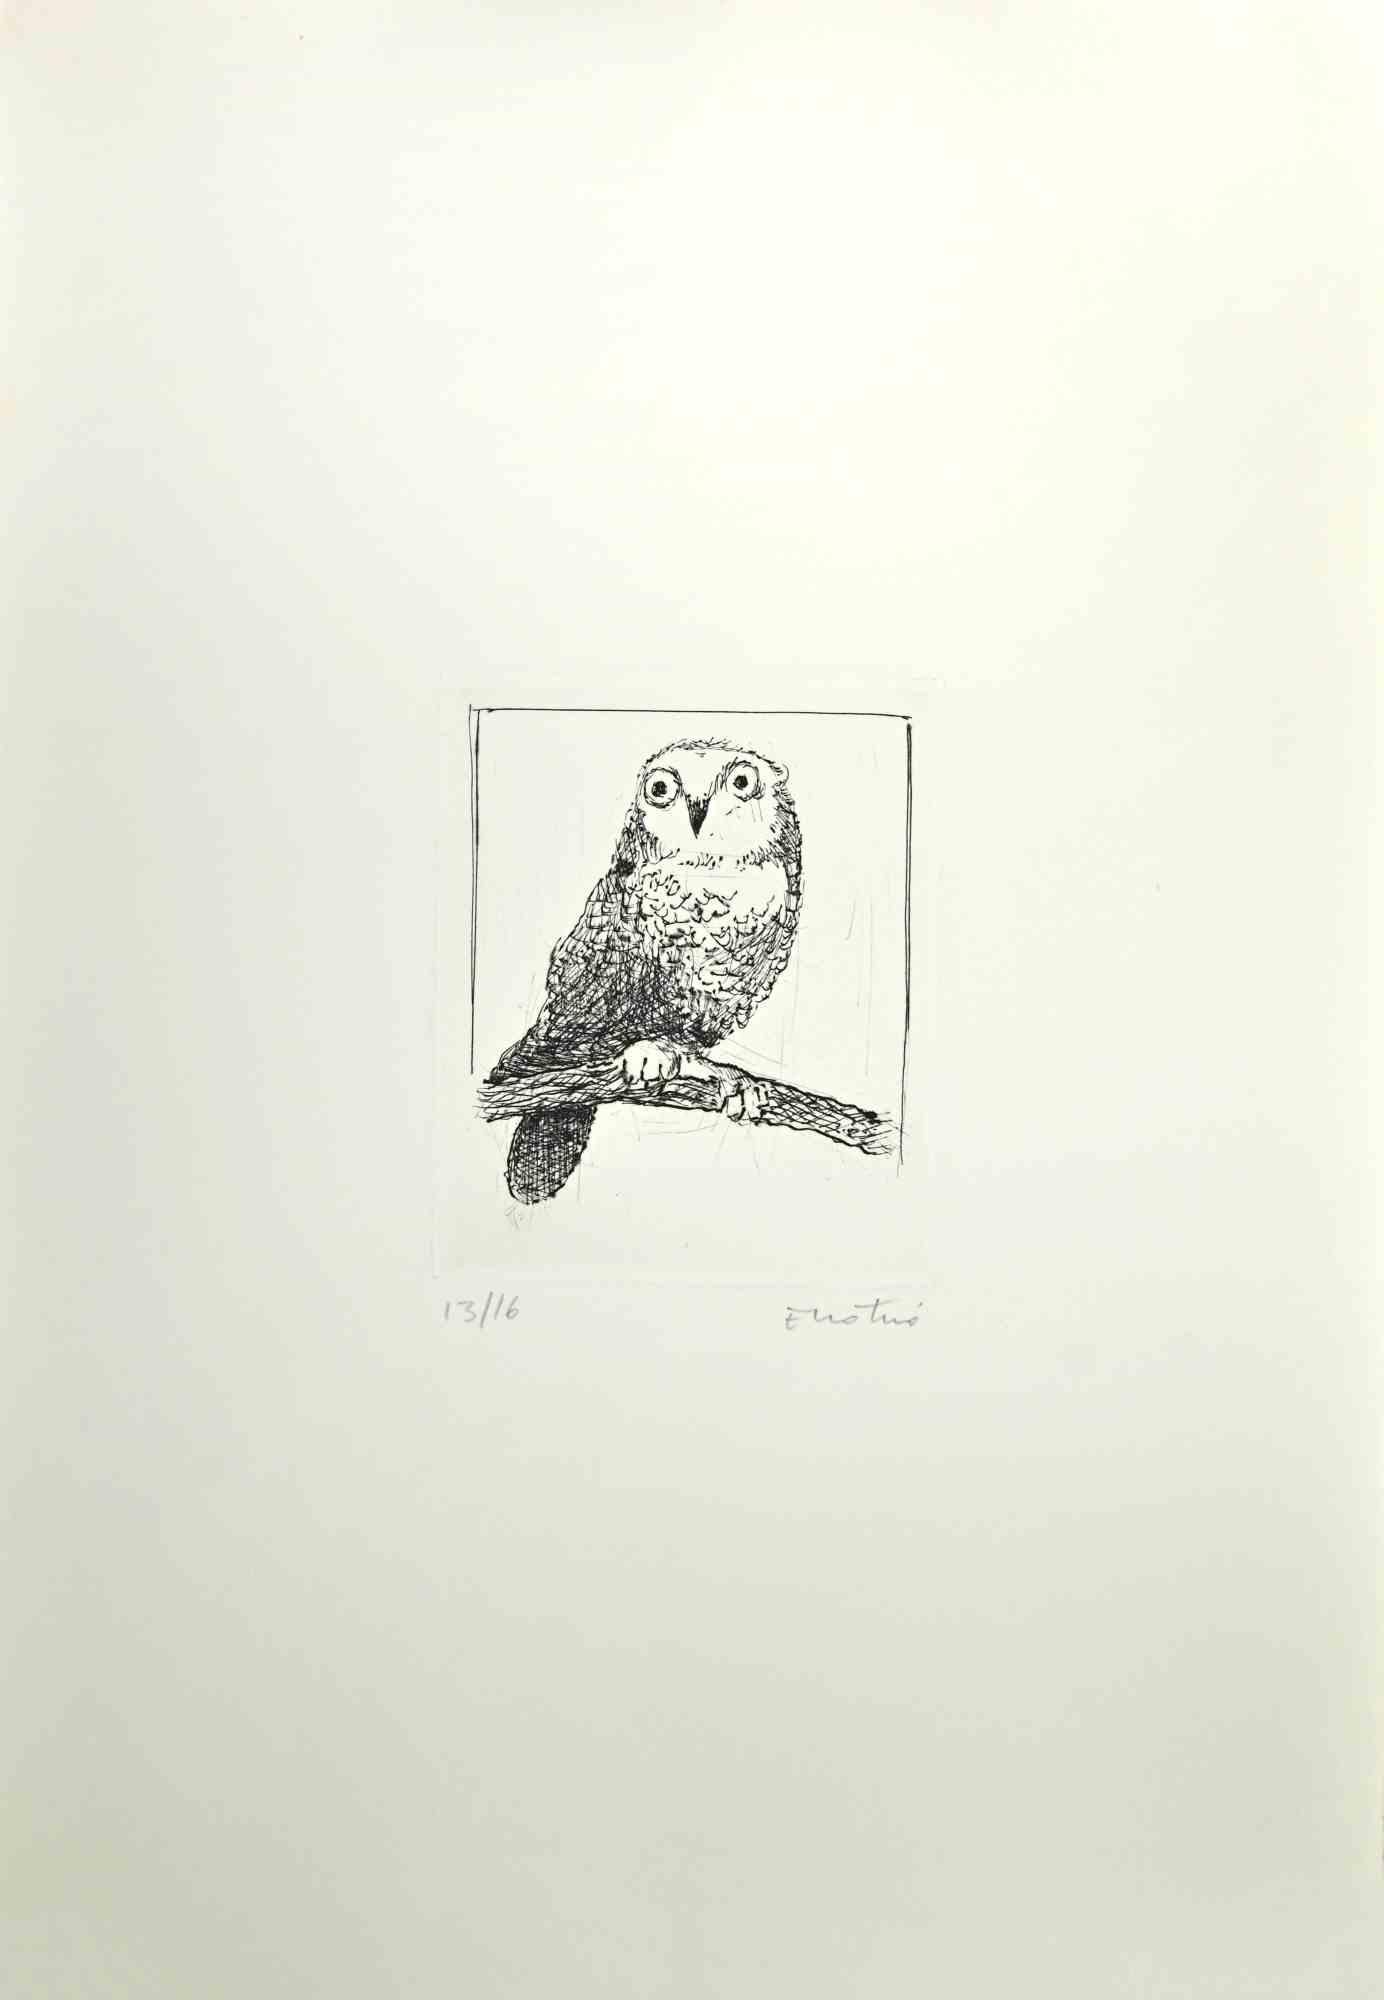 Owl is an Etching and Aquatint realized by Enotrio Pugliese in the 1970s.

Hand-signed by the artist on the lower.

Numbered, Limited edition of 16 copies numbered.

Good conditions.

Enotrio Pugliese (May 11, 1920 - August 1989) was an Italian